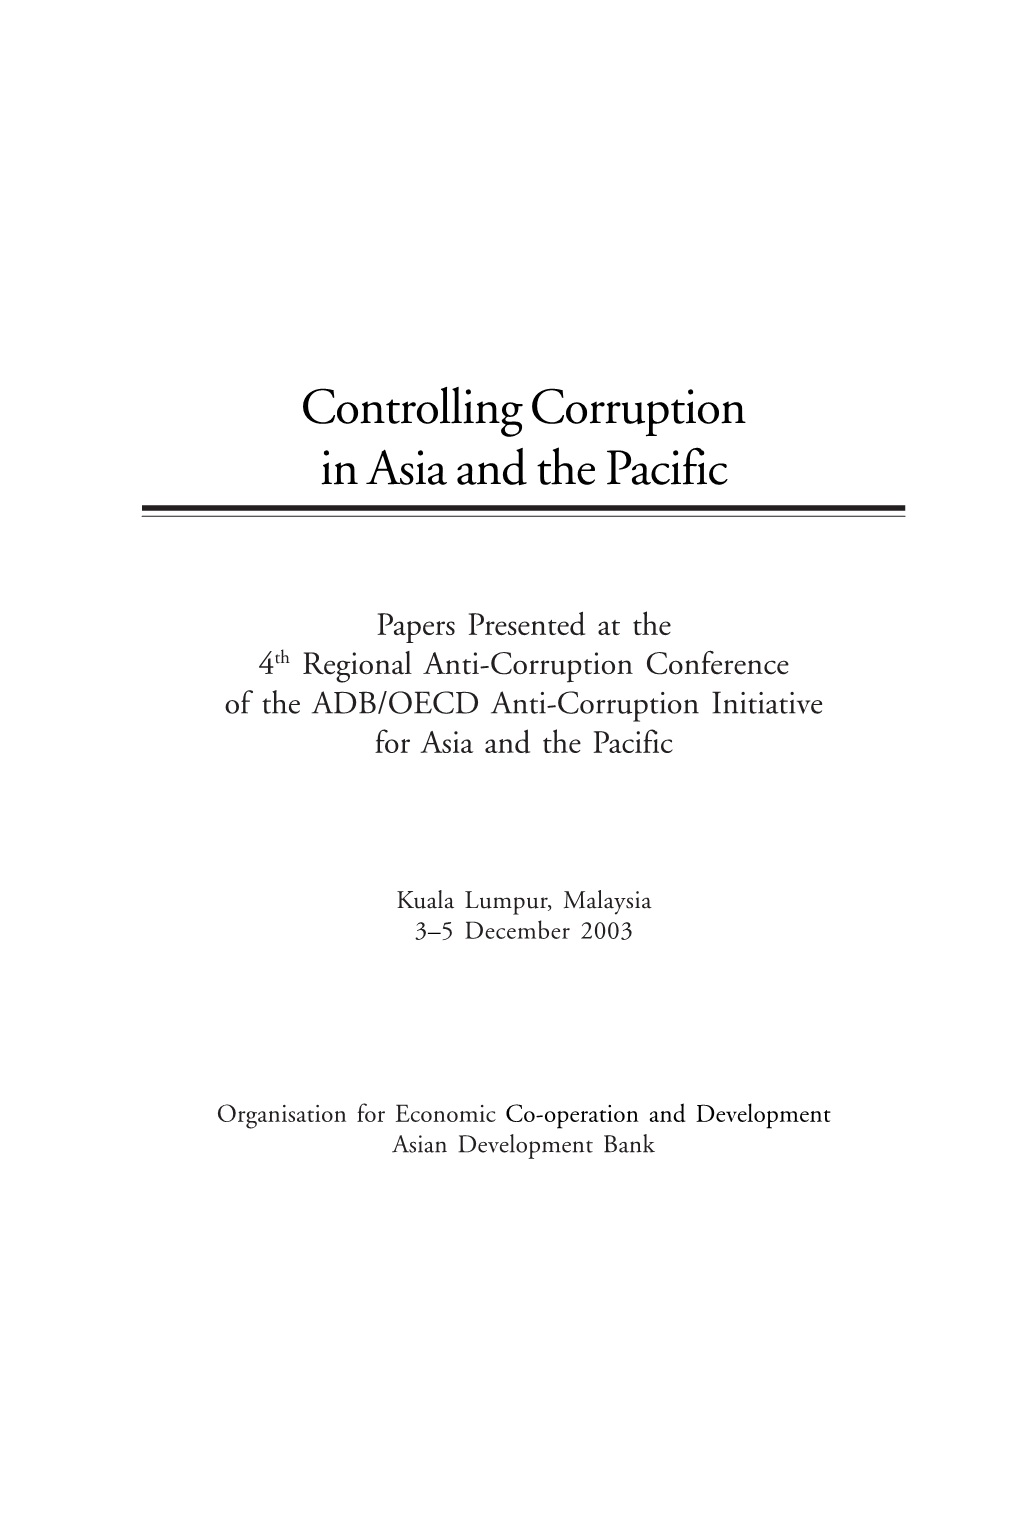 Controlling Corruption in Asia and the Pacific